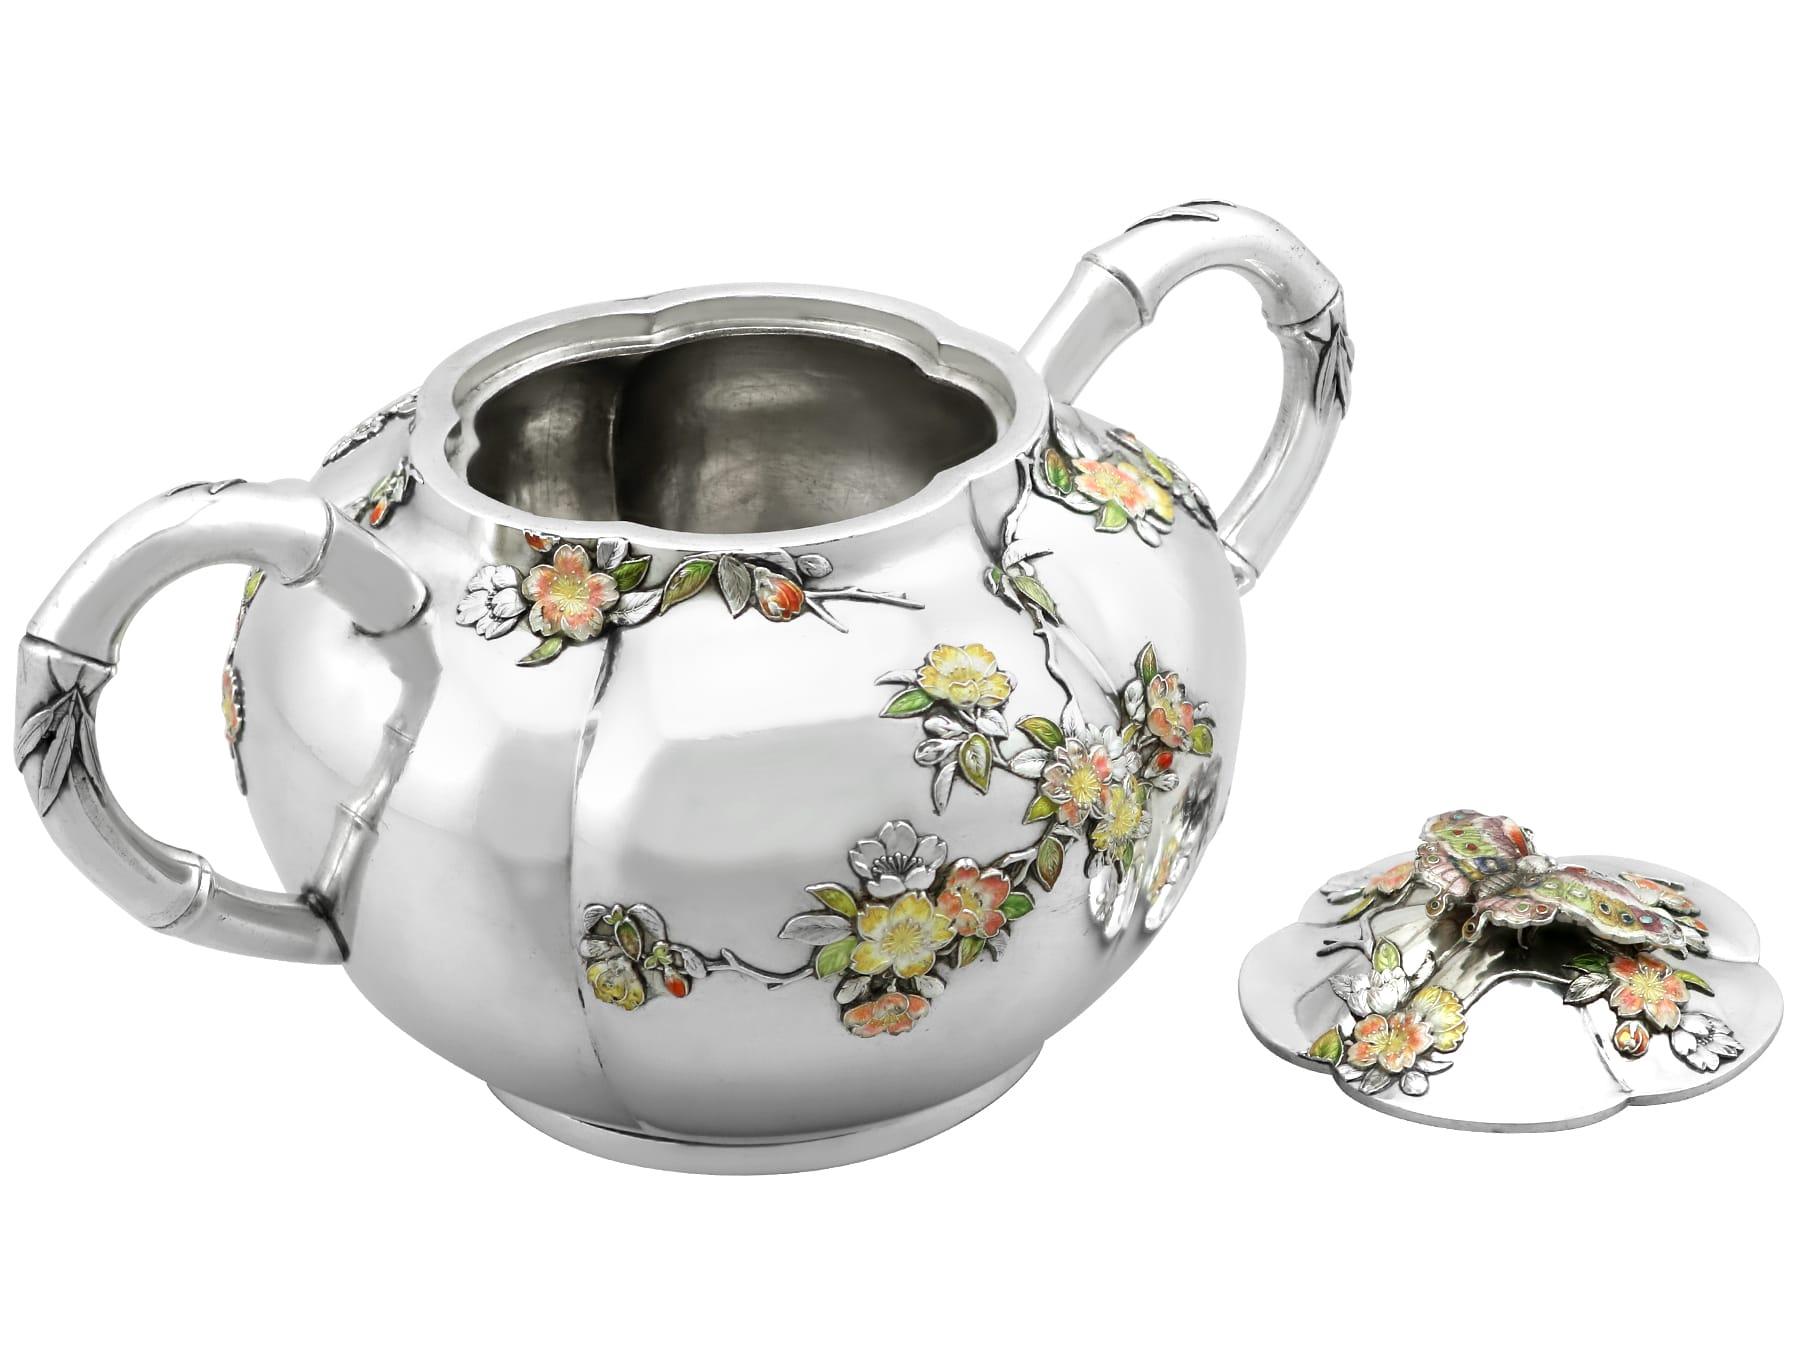 Late 19th Century Antique Japanese Silver and Enamel Cream Jug and Sugar Bowl Circa 1890 For Sale